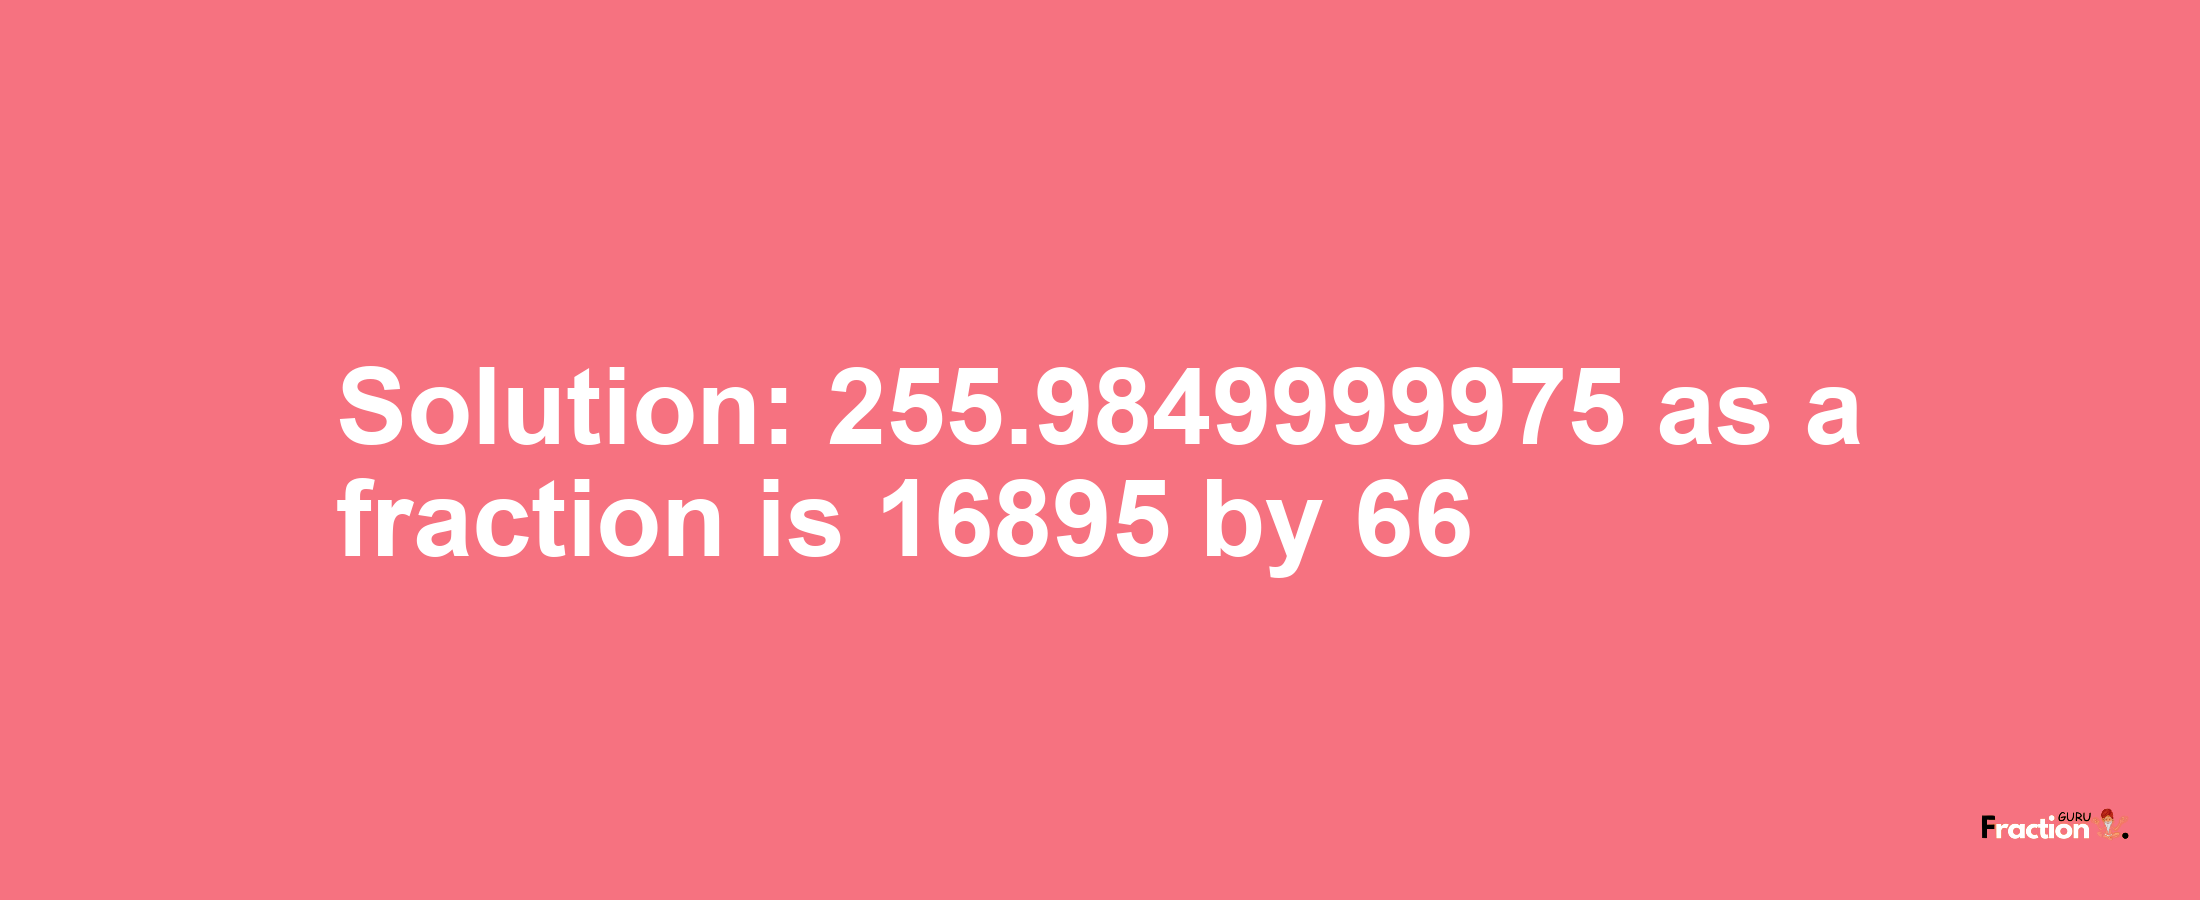 Solution:255.9849999975 as a fraction is 16895/66